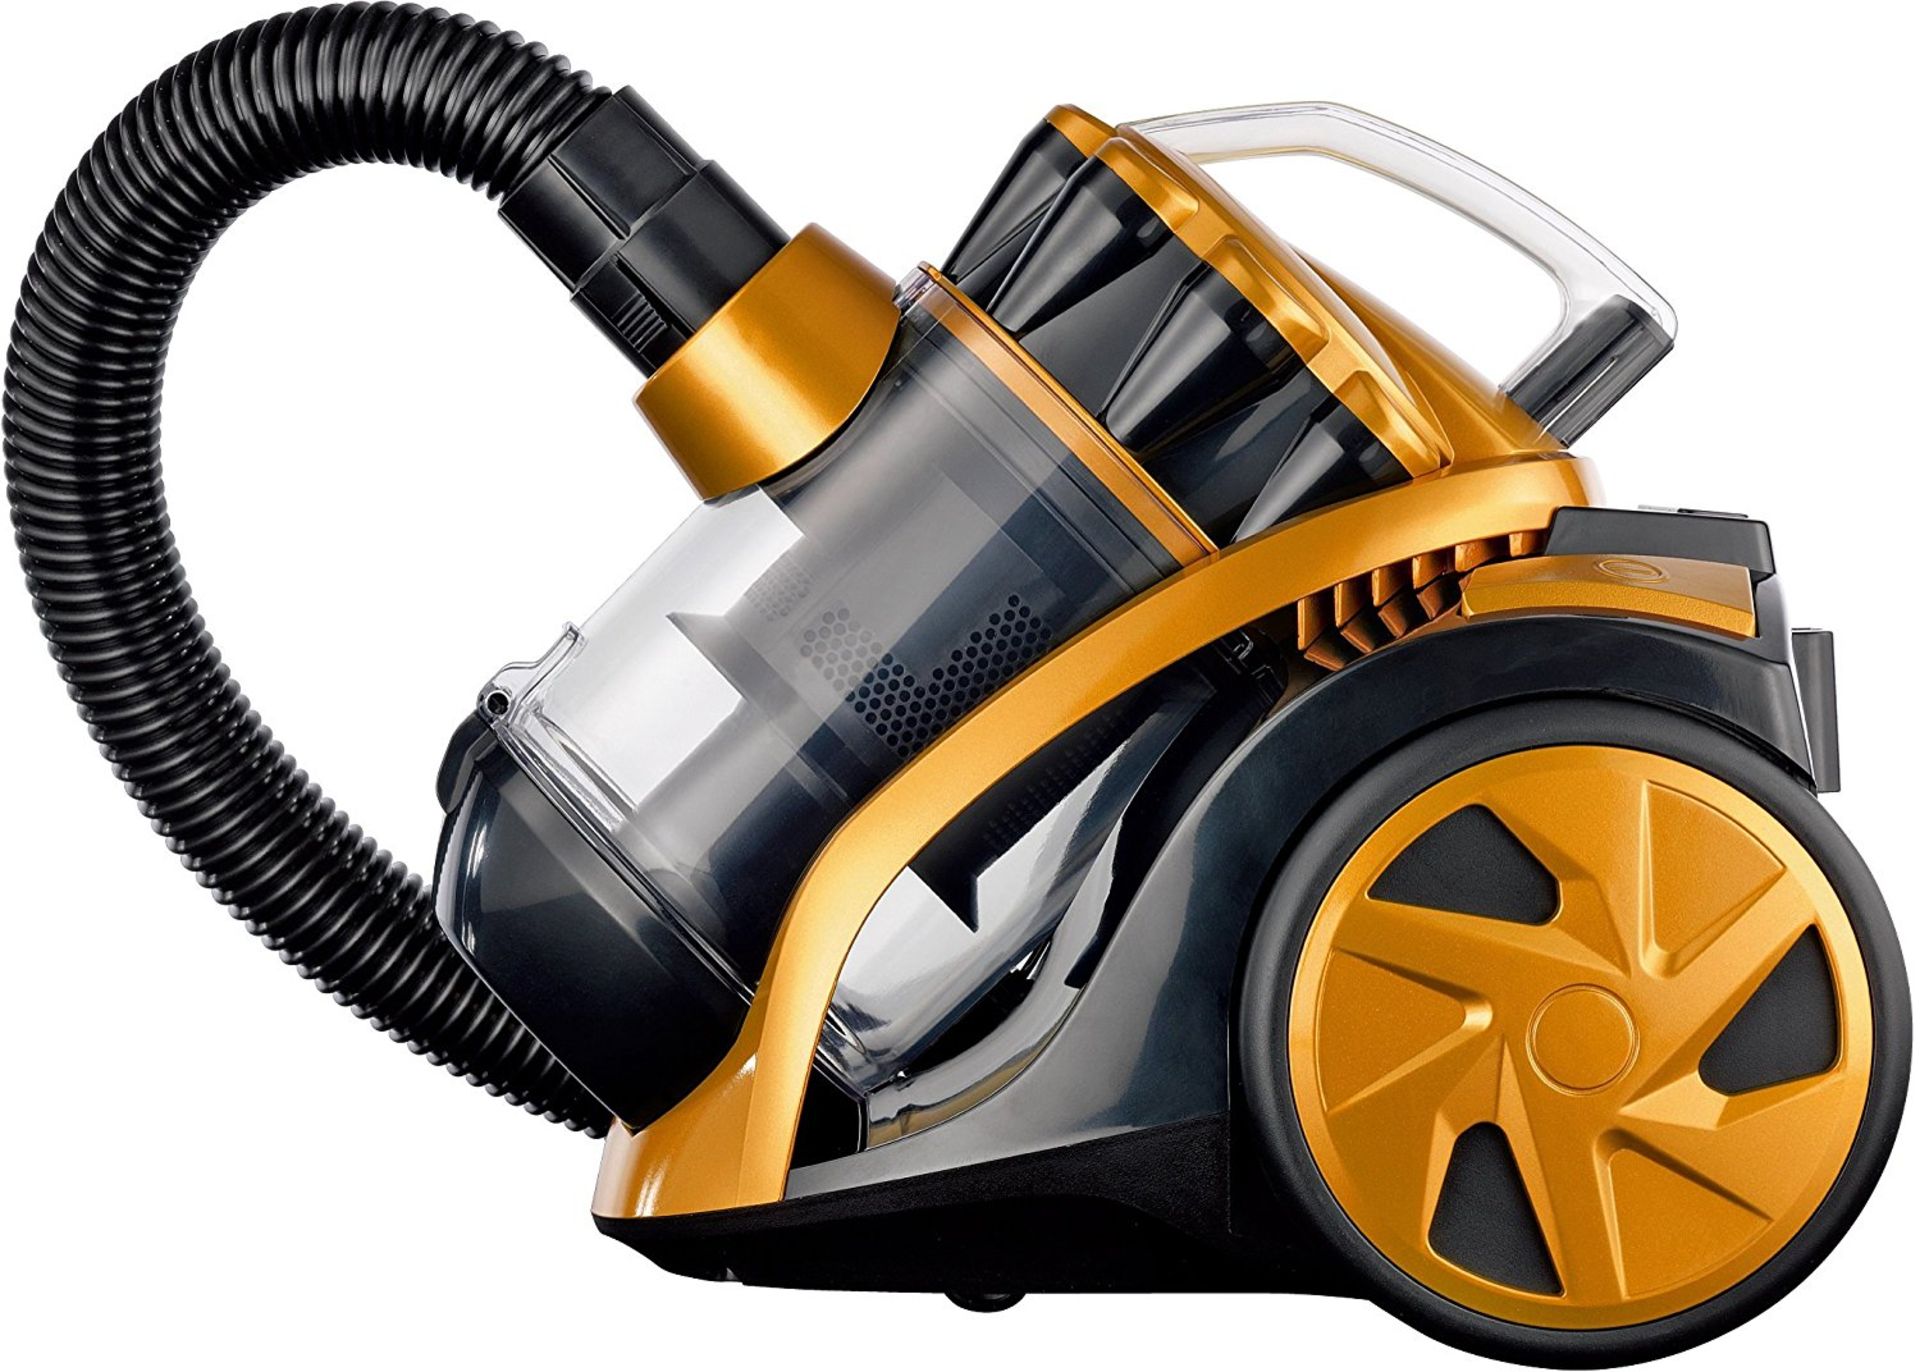 VYTRONIX VTBC01 Powerful Compact Cyclonic Bagless Cylinder Vacuum Cleaner